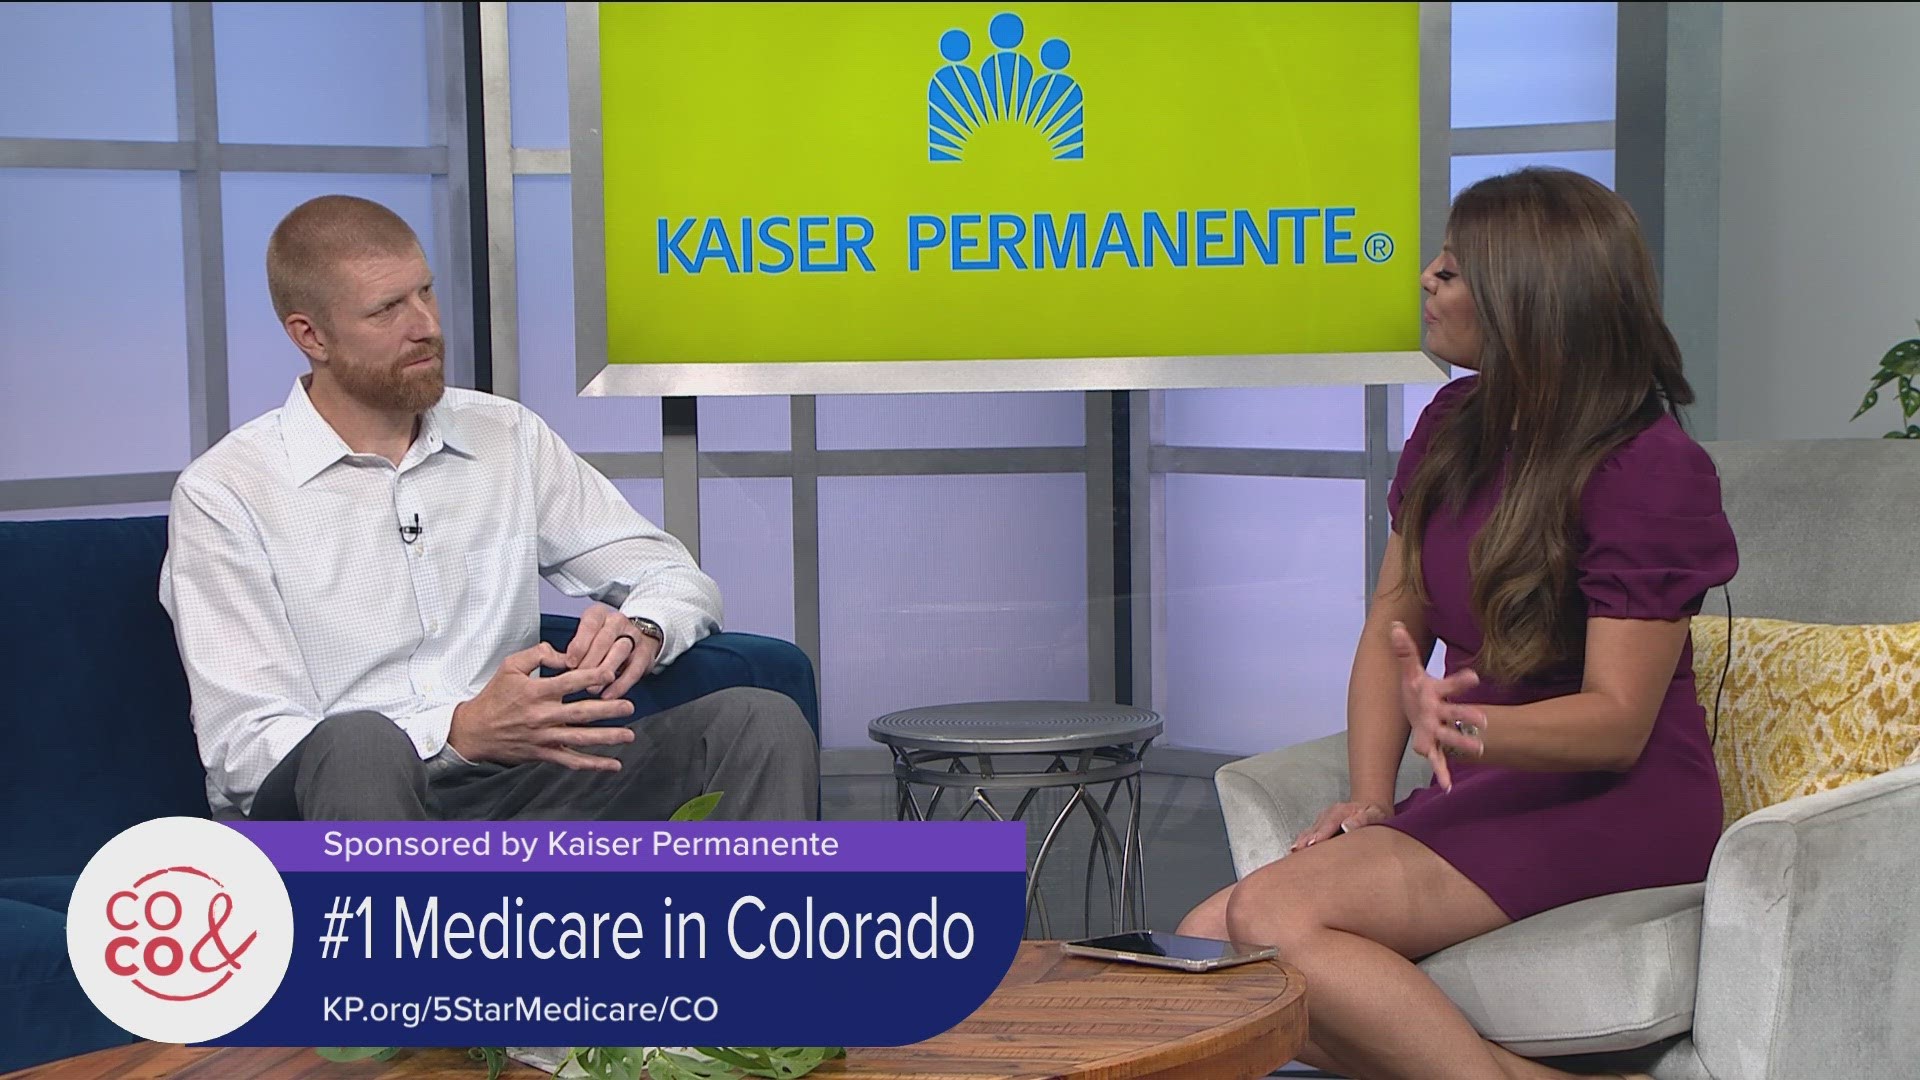 Kaiser Permanente is helping older Coloradans thrive with the #1 Medicare health plan in Colorado. Learn more and connect with a rep at KP.org/5StarMedicare/CO.